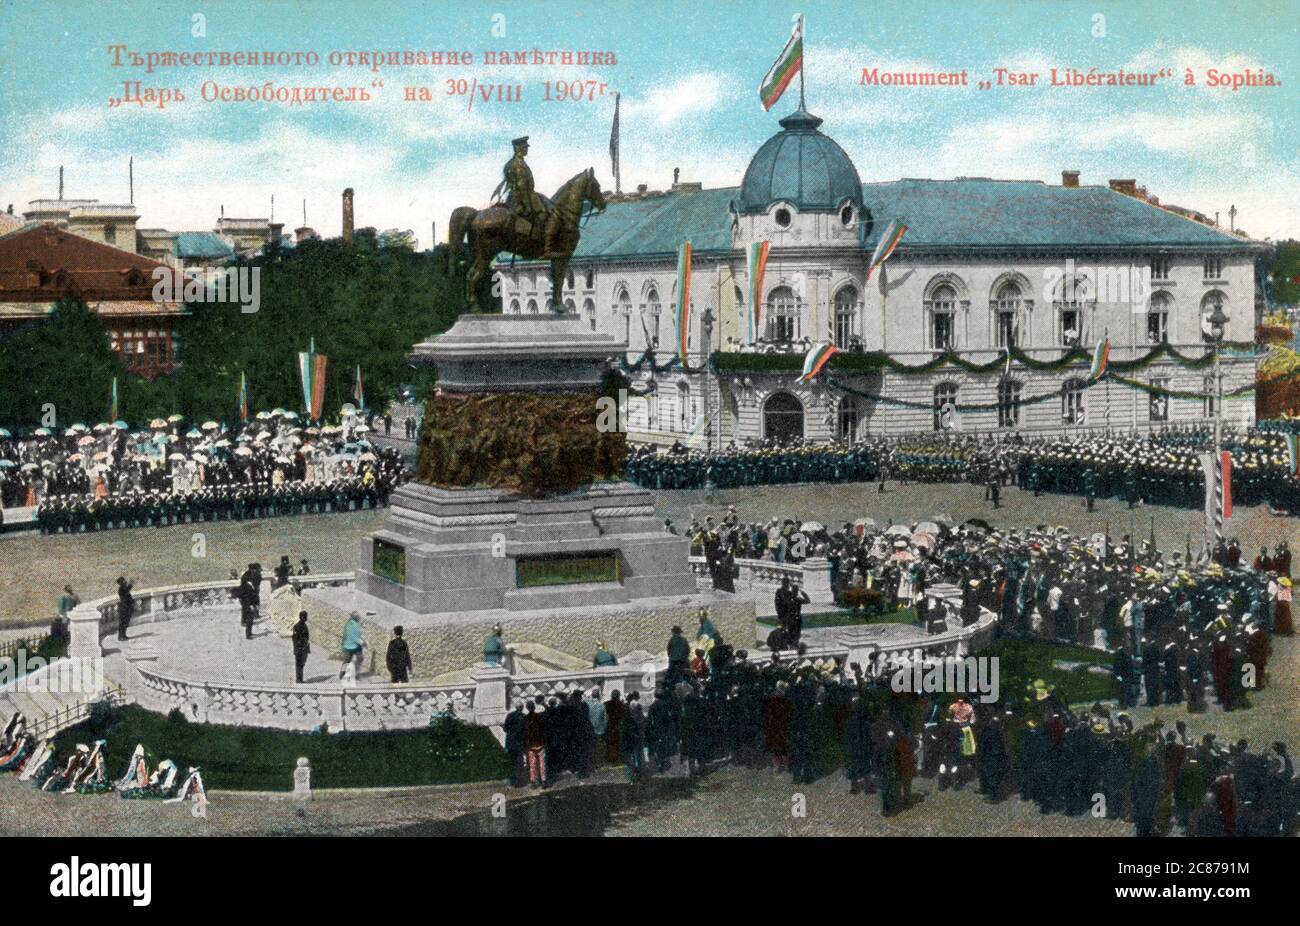 The Inauguration (on 30th August, 1907) of The equestrian Monument to the Tsar Liberator in the centre of Sofia, the capital of Bulgaria. It was erected in honour of Russian Emperor Alexander II who liberated Bulgaria from Ottoman rule during the Russo-Turkish War of 1877-78. The monument  is located on Tsar Osvoboditel Boulevard, facing the National Assembly of Bulgaria     Date: 1907 Stock Photo